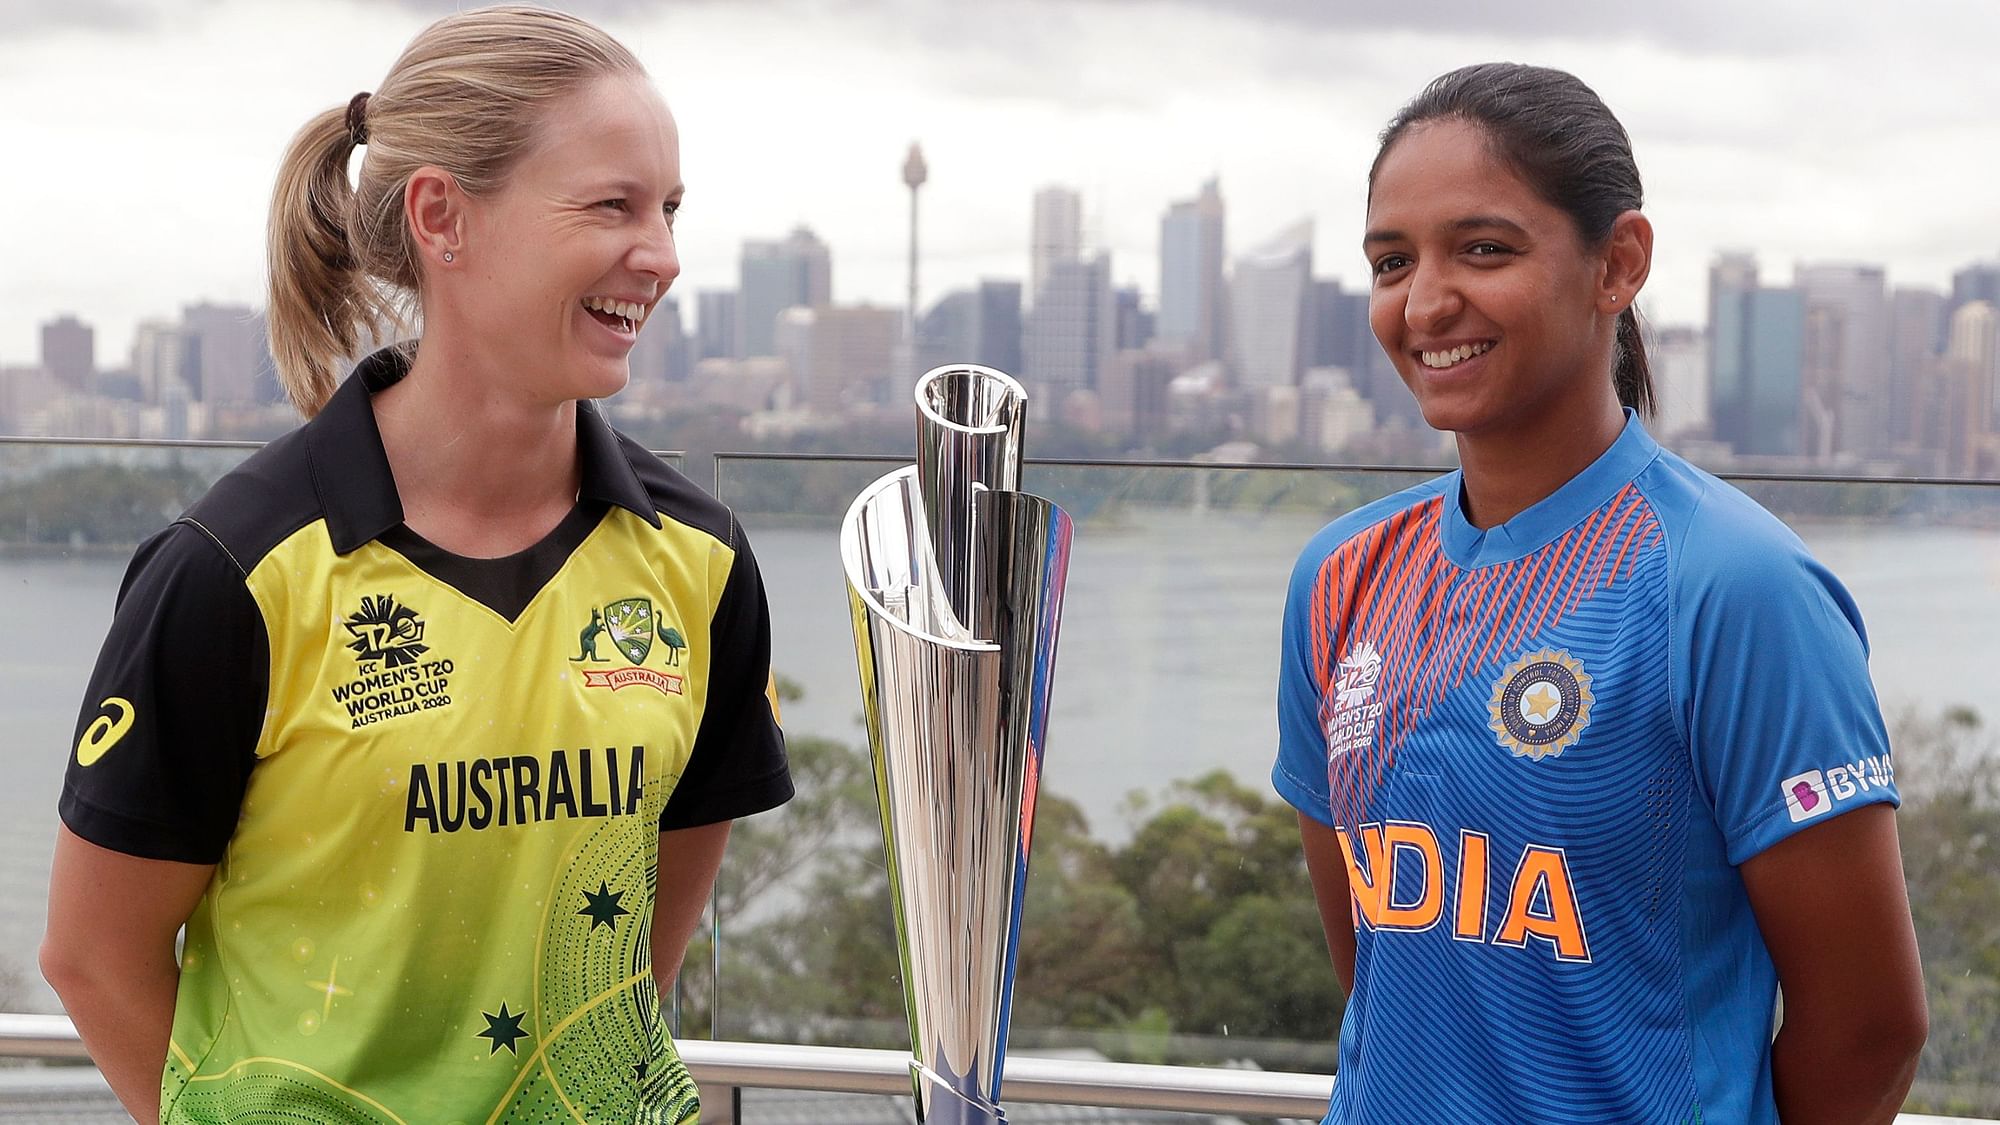 India and Australia are into the Women’s Twenty20 Cricket World Cup final.